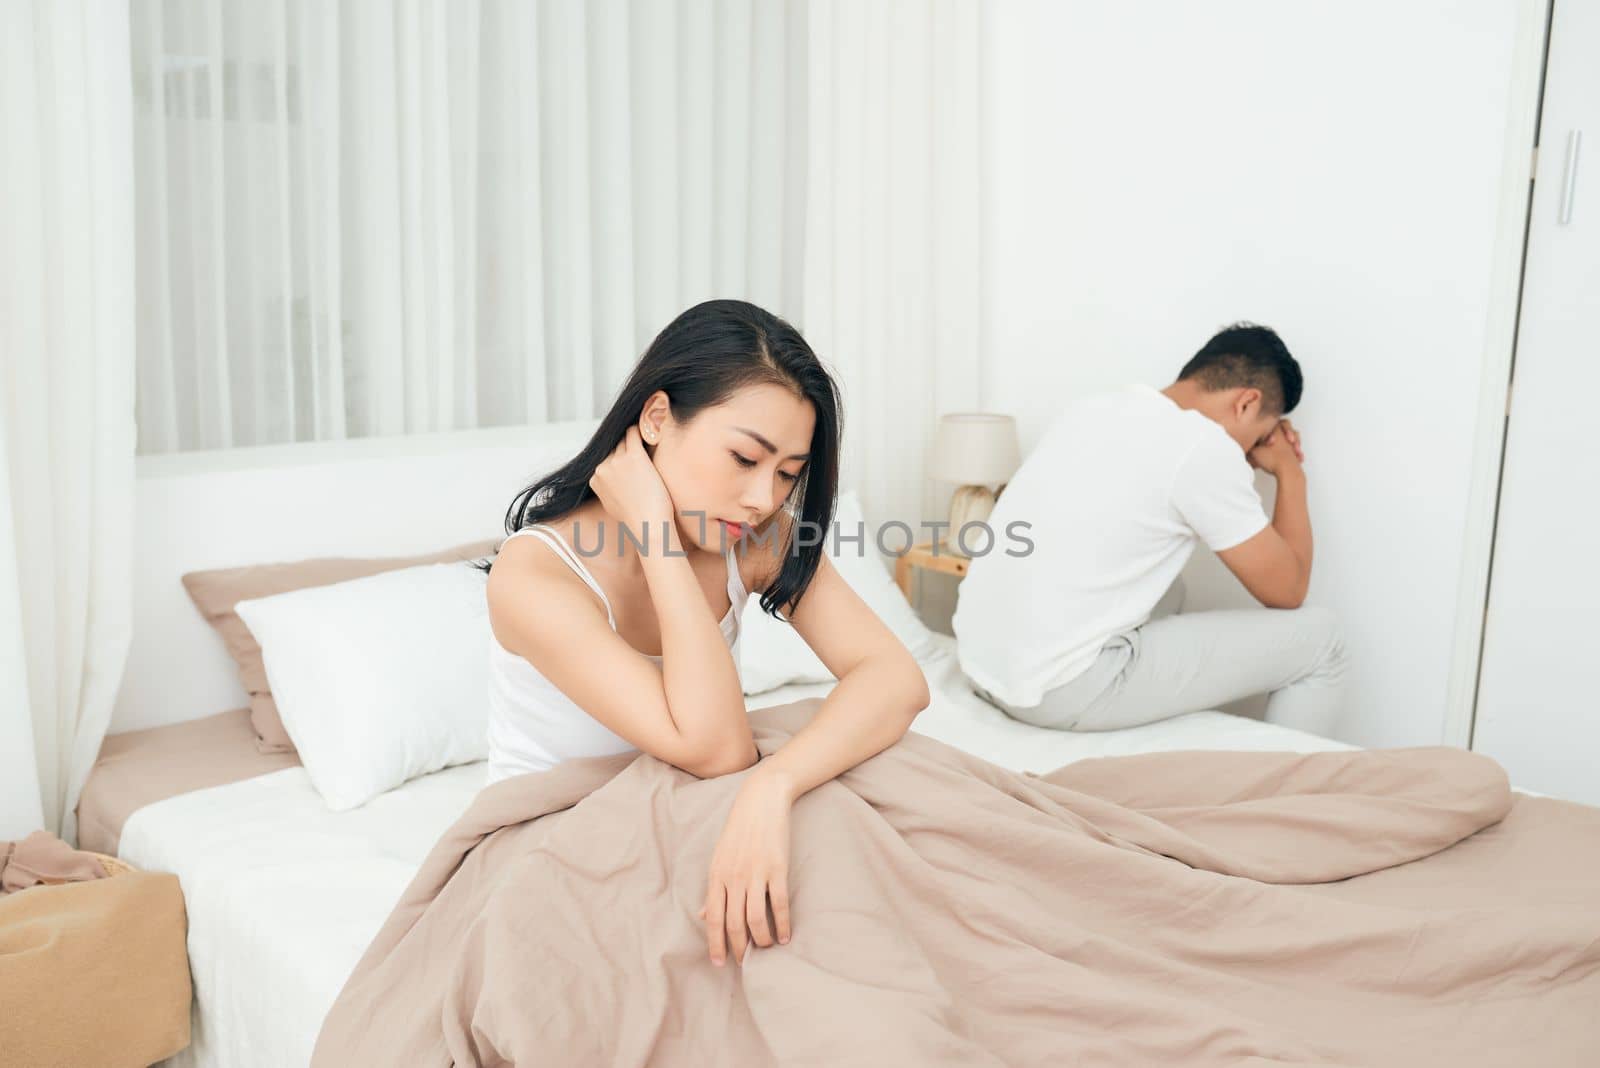 Wife always sulking & husband get angry easily. He has problem with erection too